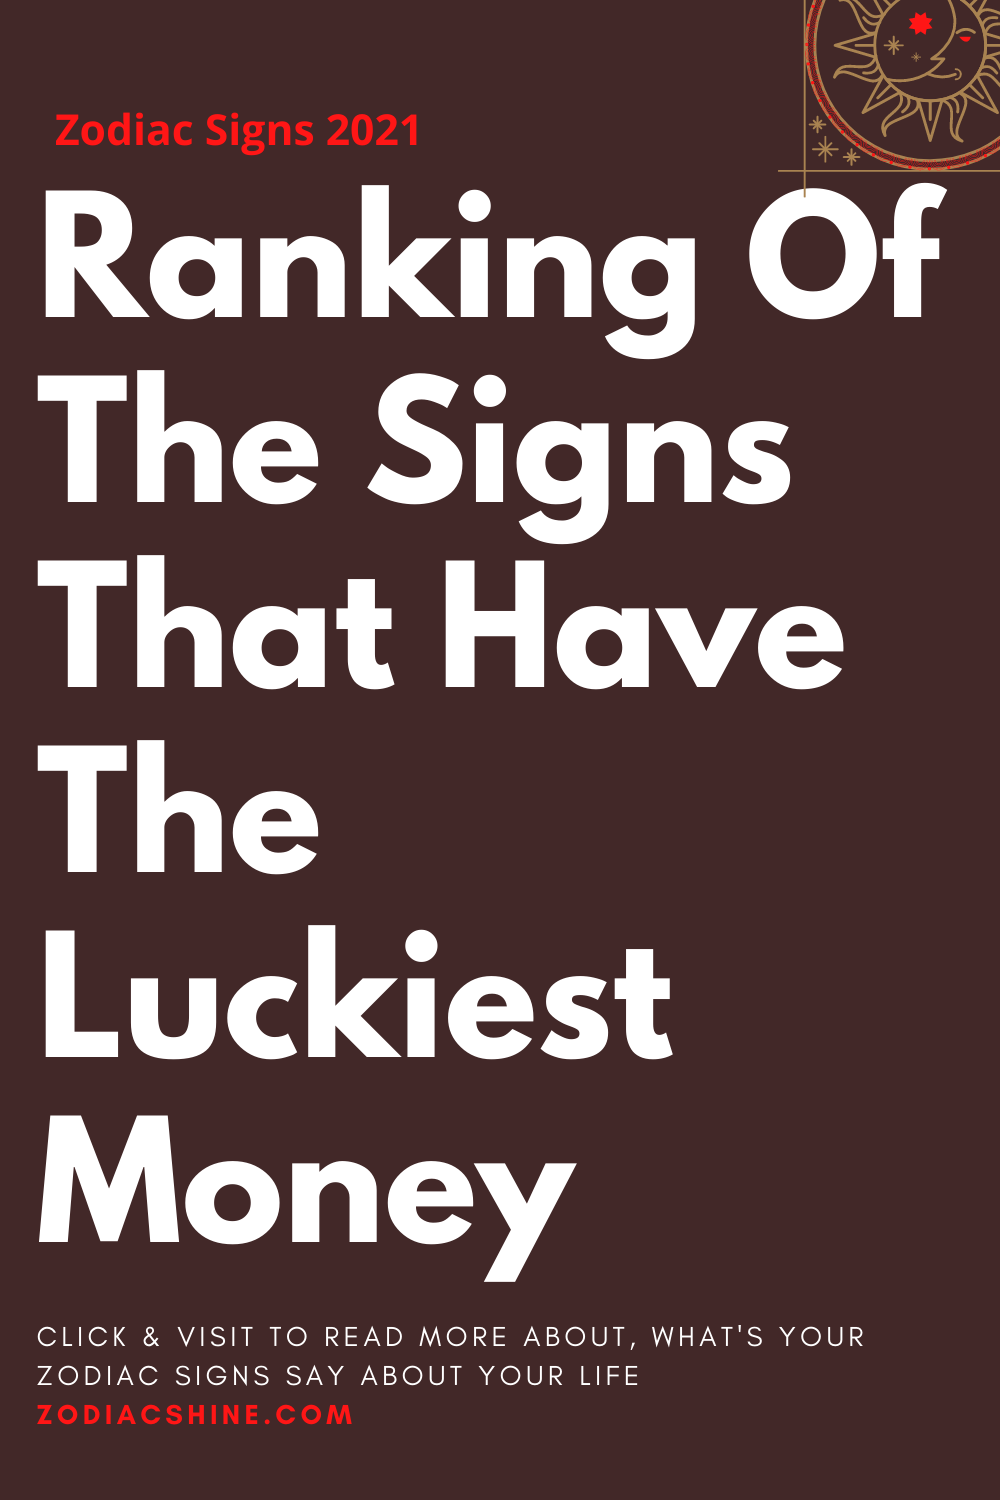 Ranking Of The Signs That Have The Luckiest Money